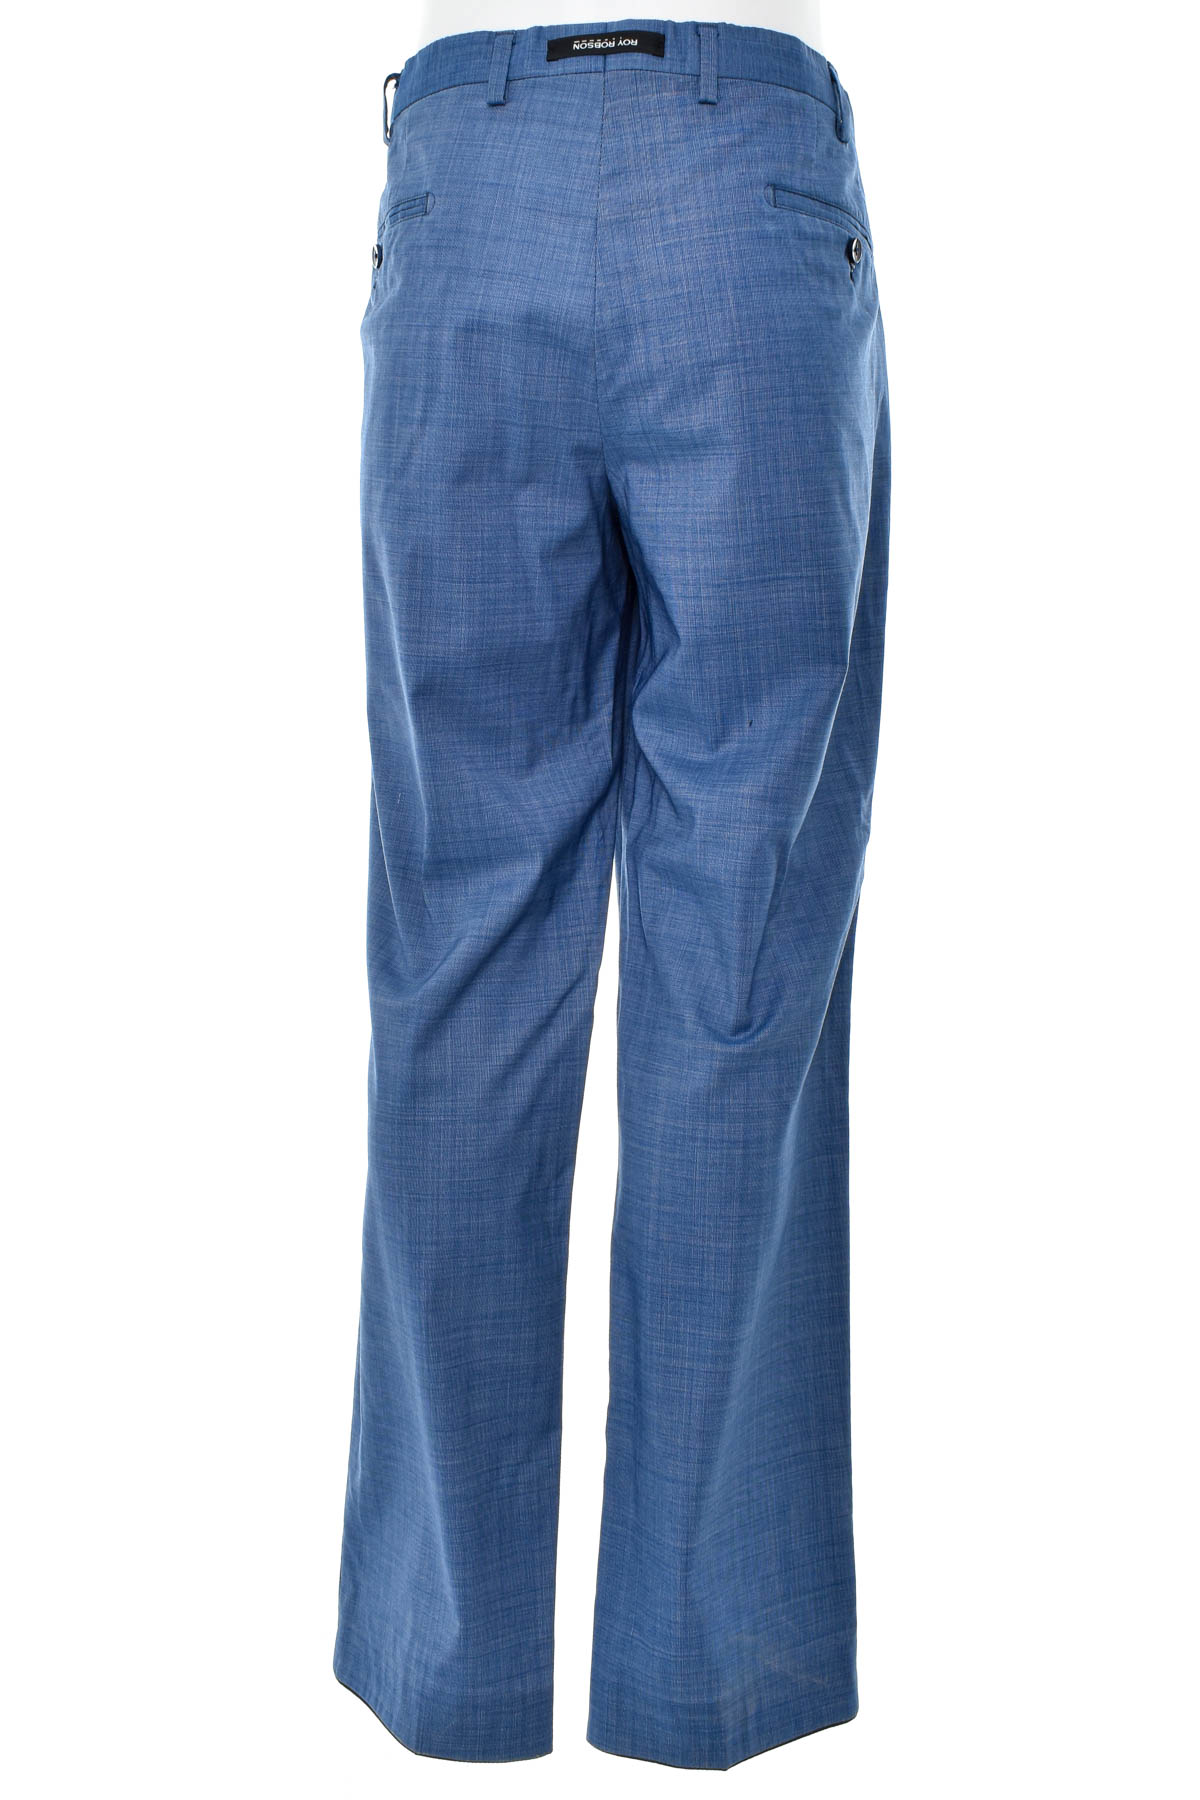 Men's trousers - Roy Robson - 1